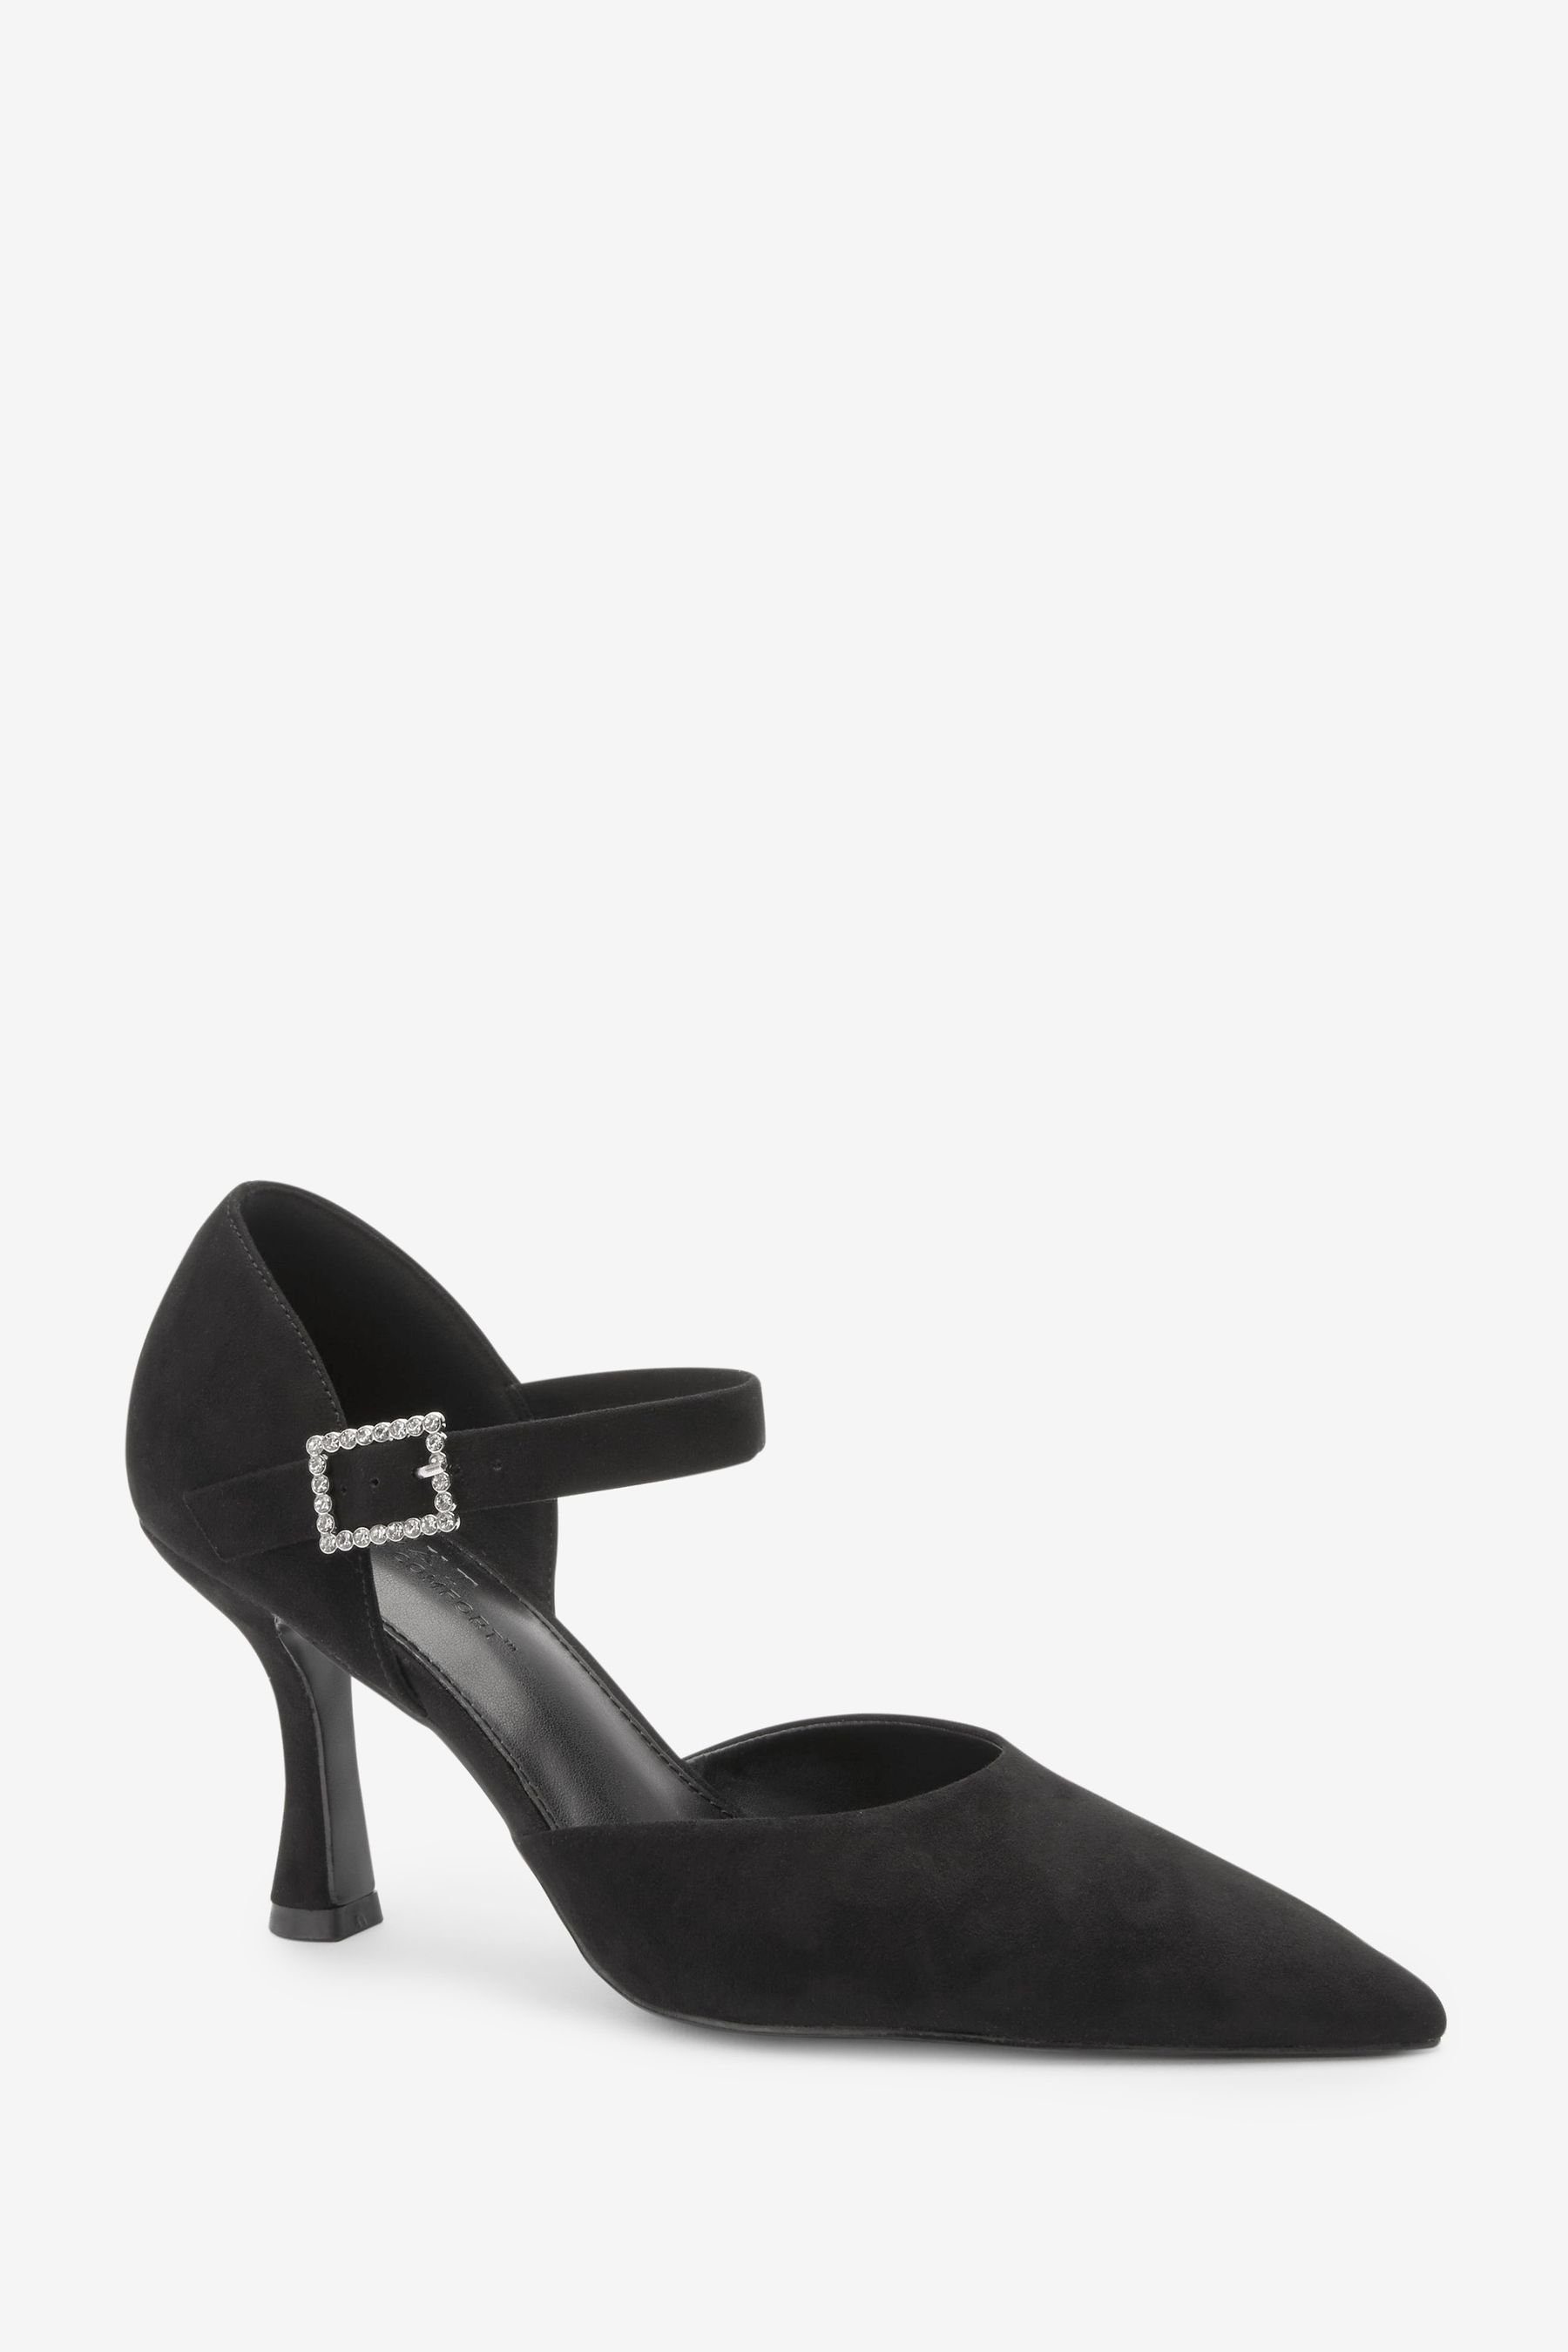 Mary-Jane-Pumps (1-tlg) Buckle Jewel Black Next Forever Mary-Jane-Schuhe Spitze Comfort with